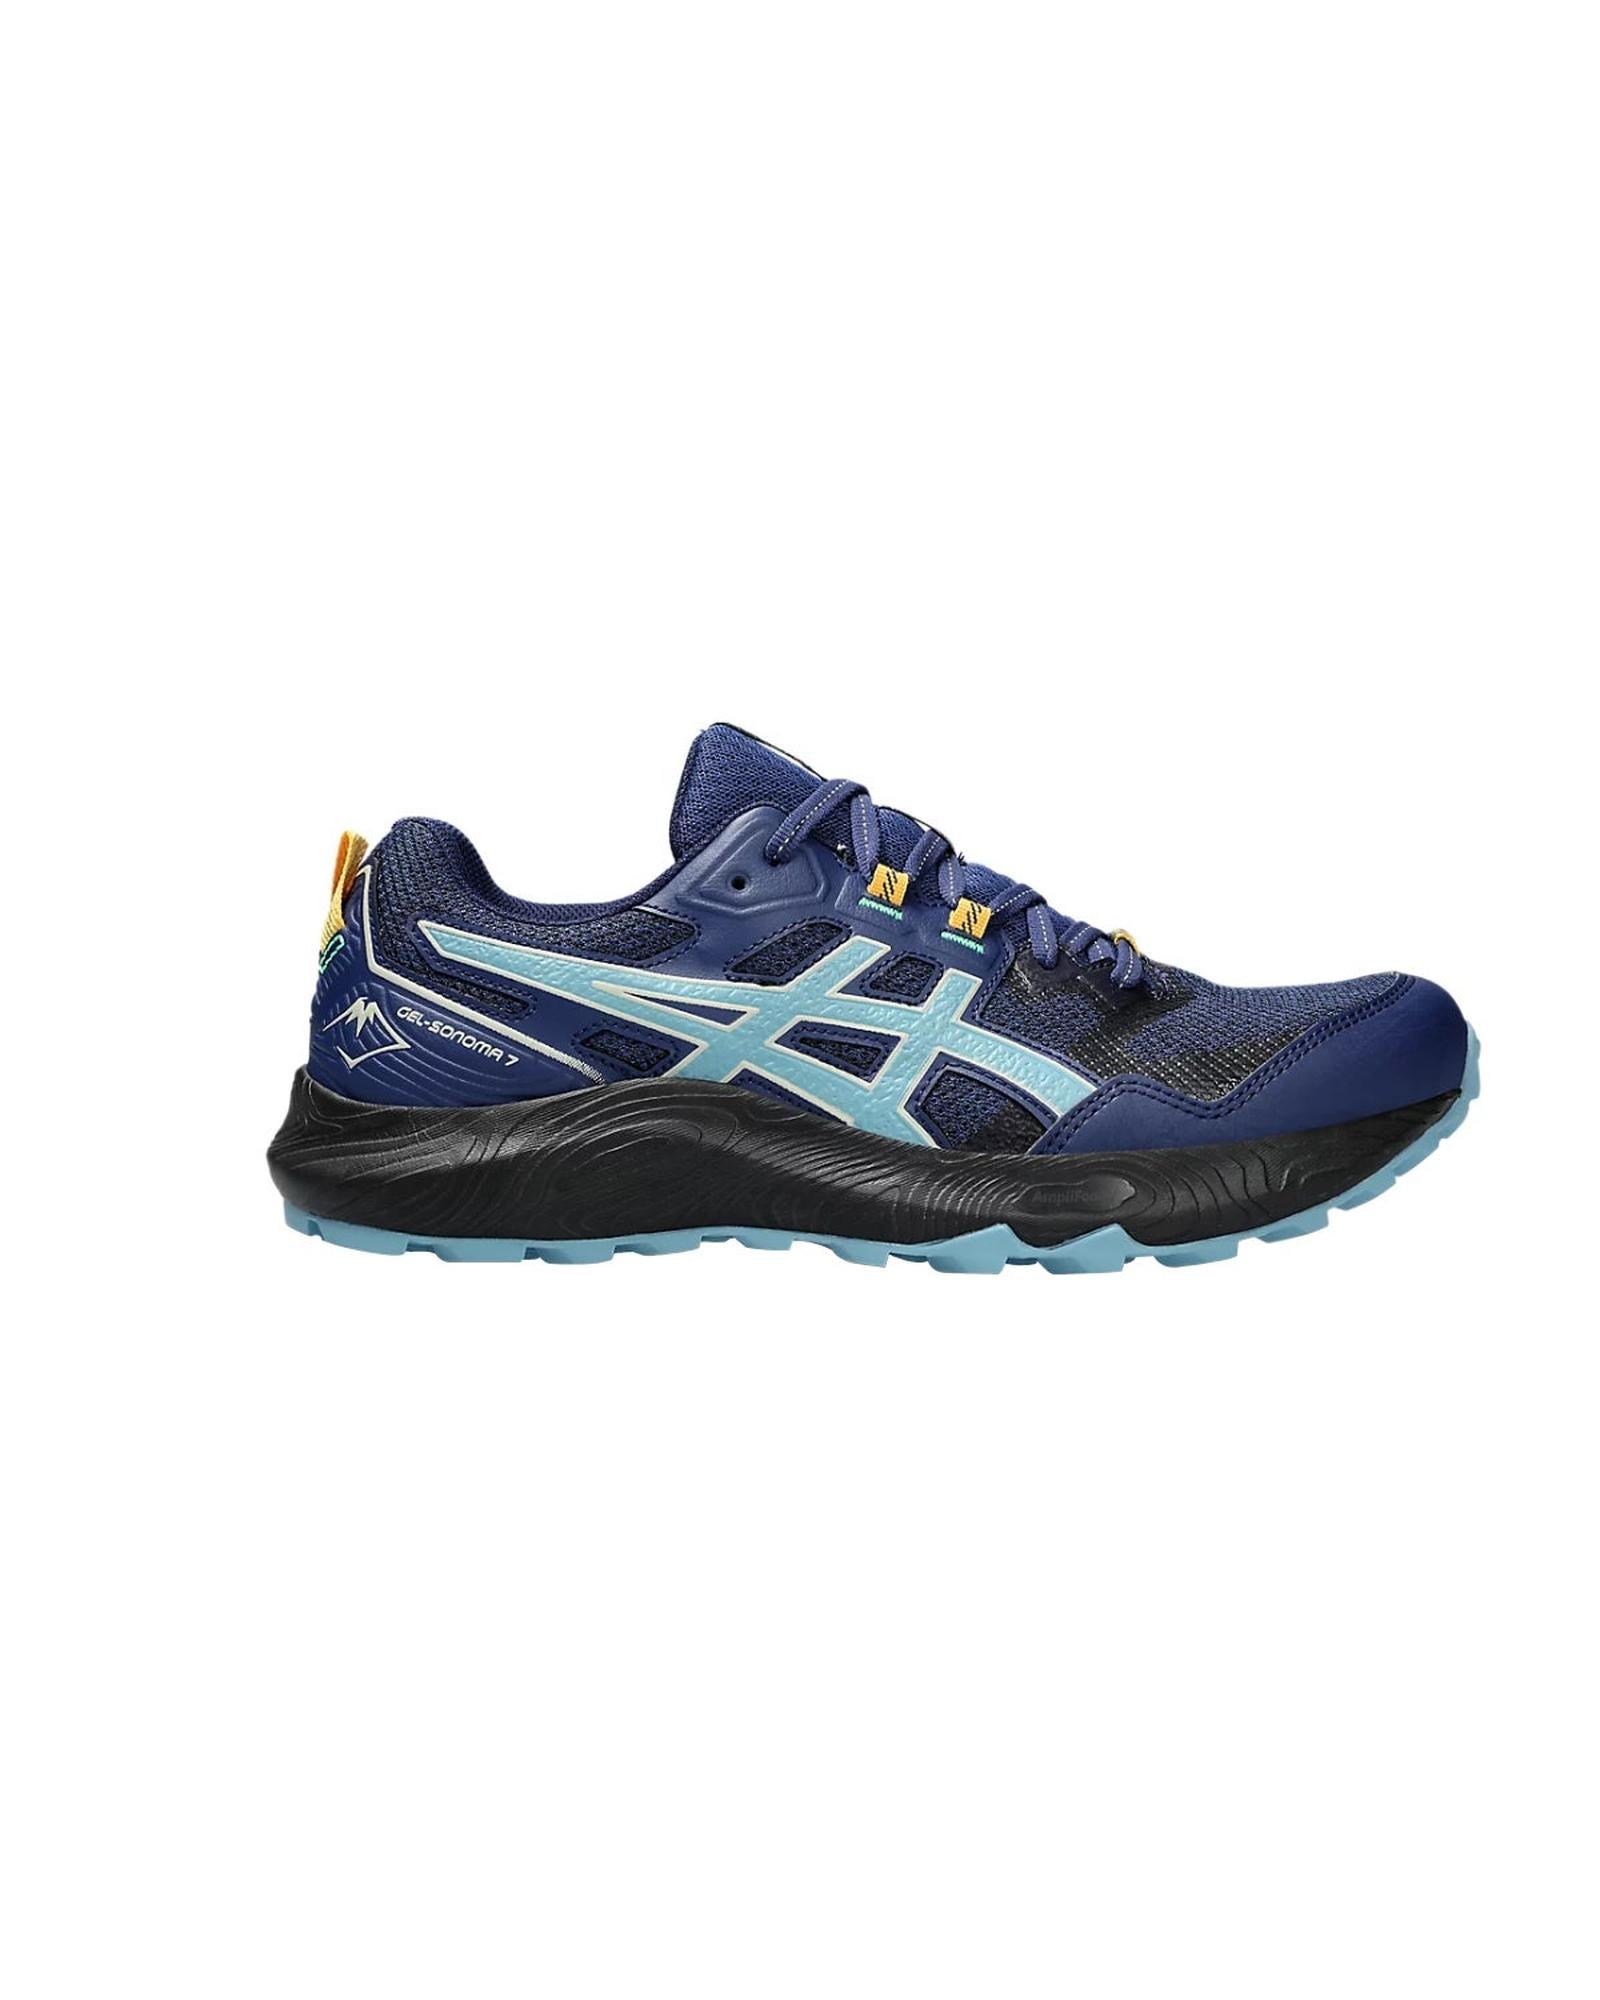 Gel-Sonoma 7 Running Shoes with Reliable Off-Road Grip in Deep Ocean Gris Blue - 10.5 US